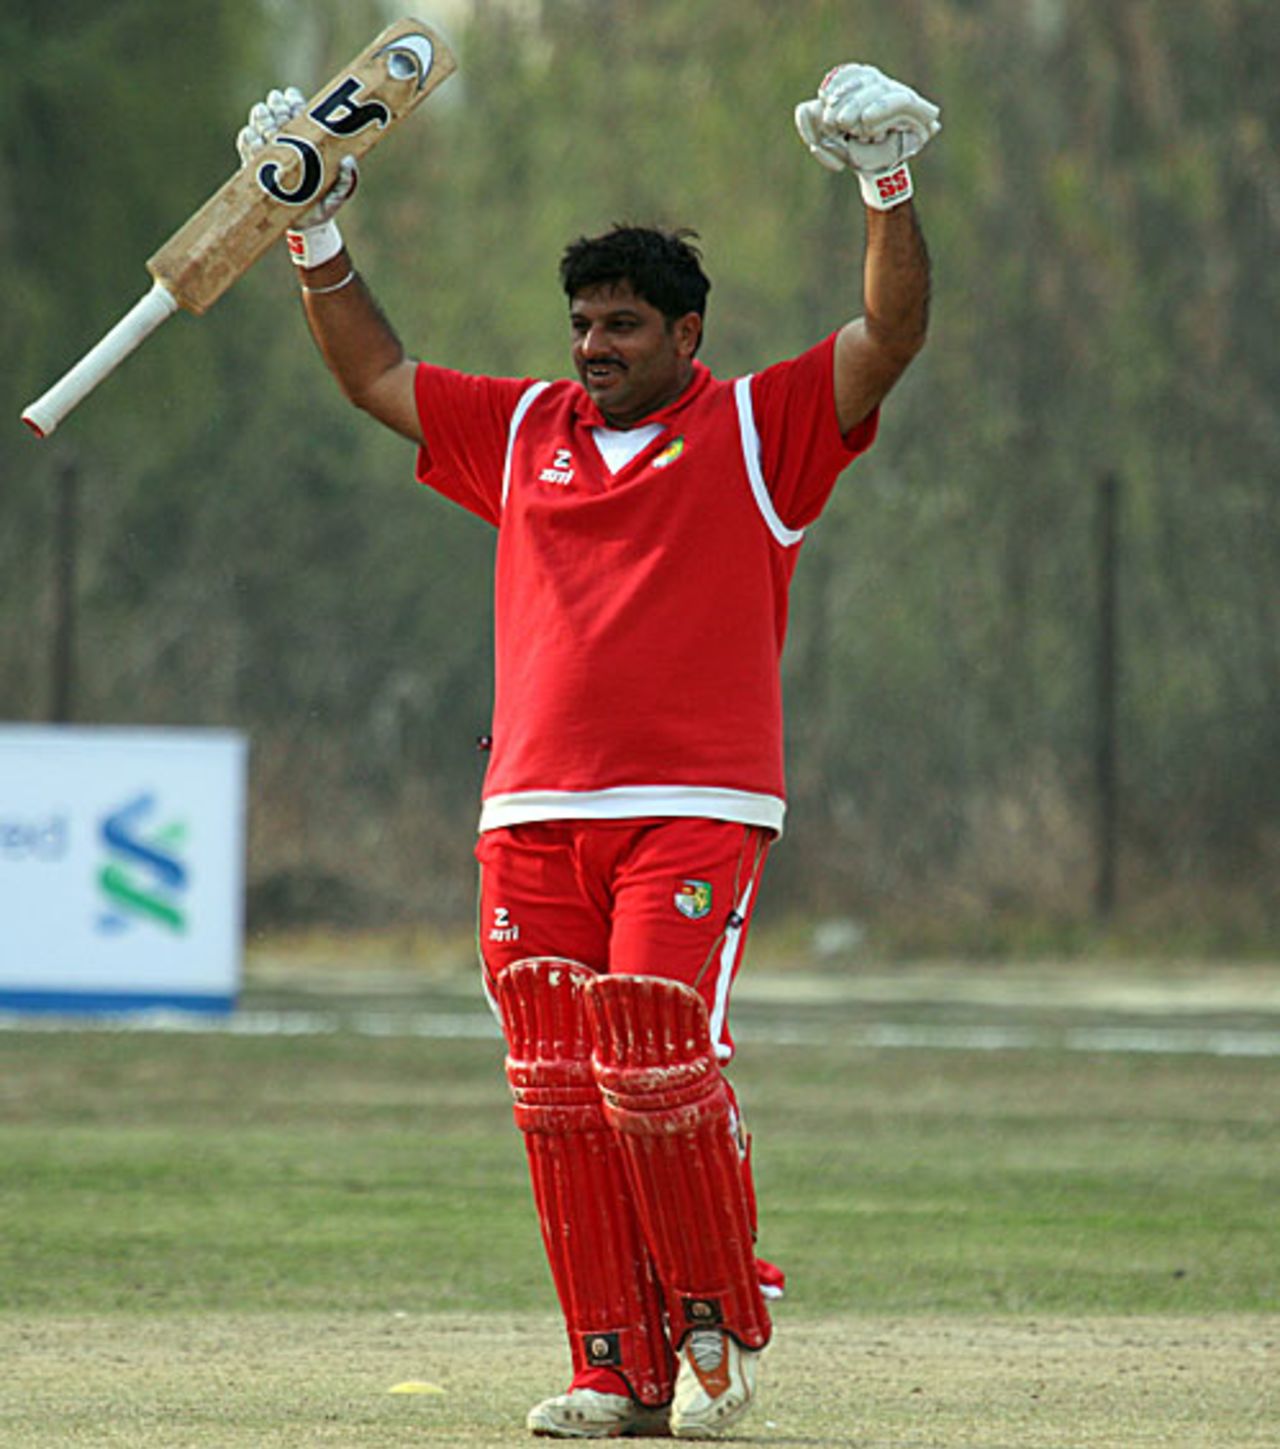 Monish Arora punches the air after guiding Singapore to victory, Fiji v Singapore, ICC World Cricket League Division Five, Lalitpur, February 23, 2010